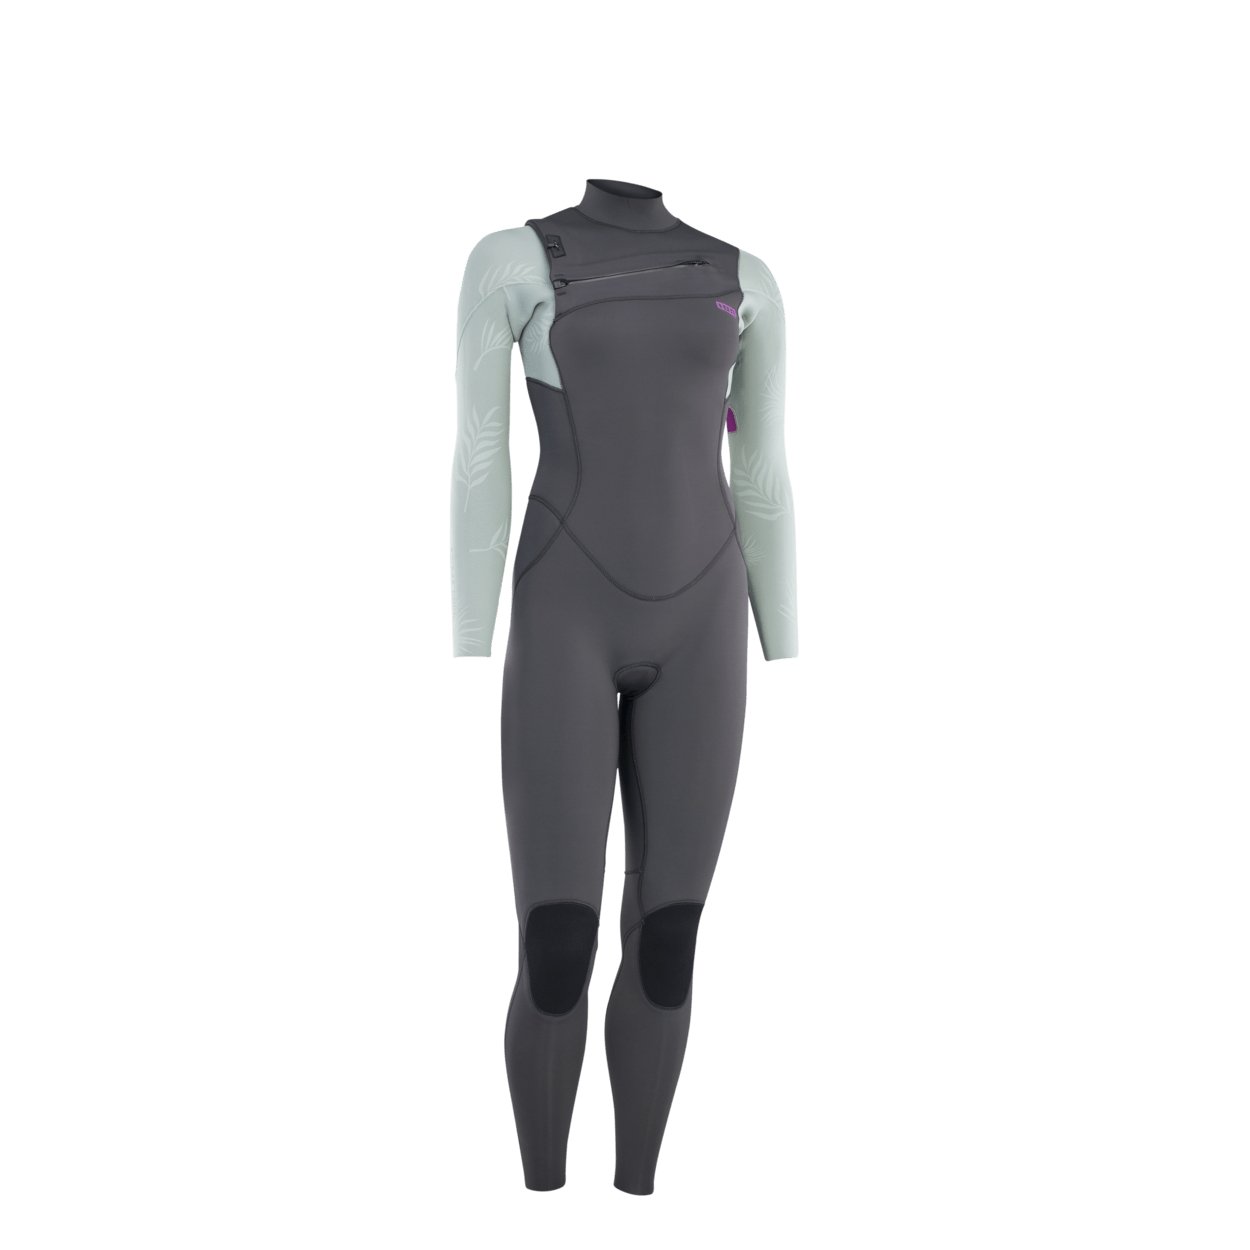 ION Amaze Core 3/2 Front Zip 2023 - Worthing Watersports - 9010583089010 - Wetsuits - ION Water